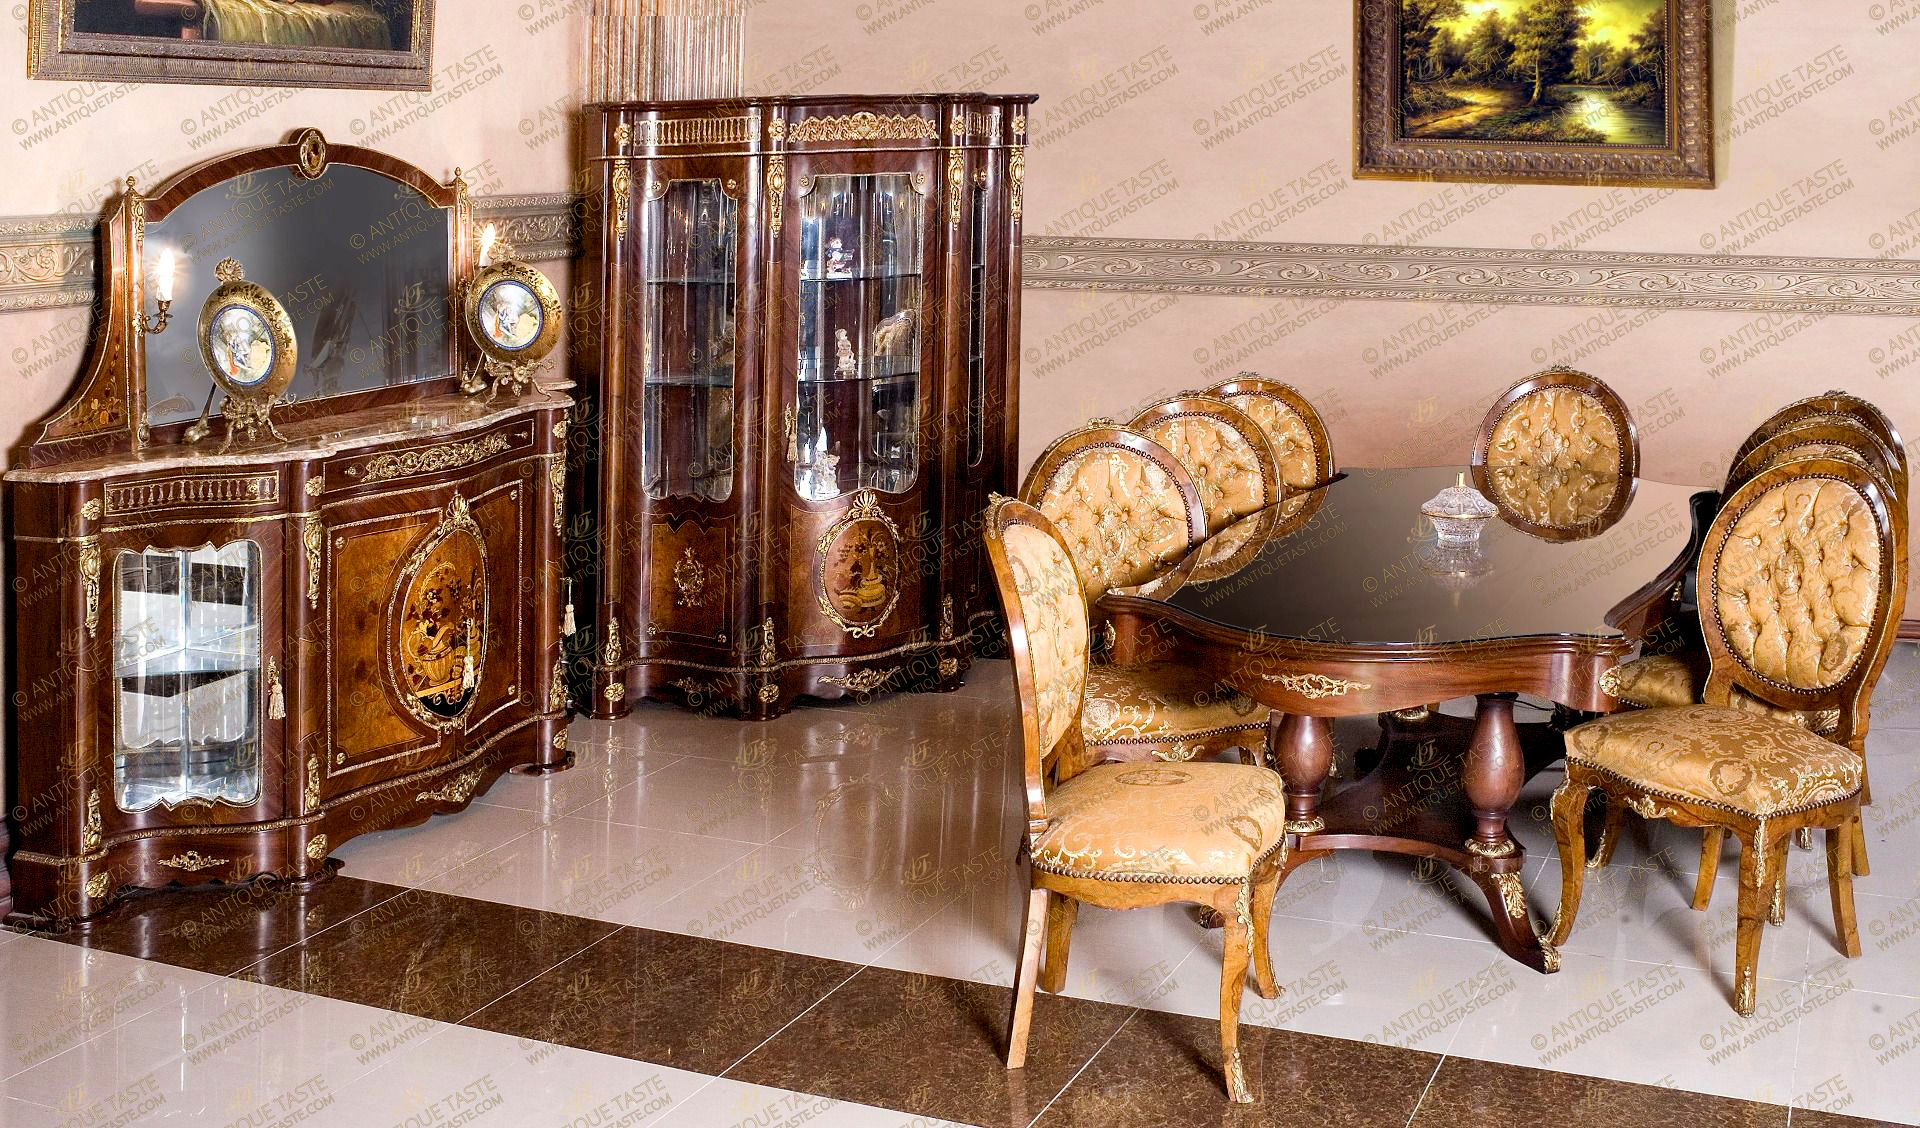 An impressive French Napoleon III Louis XV Revival style eleven pieces luxury Dining Room Set; comprising of one pedestal dining table with shelf X stretcher, eight dining chairs finely inlaid in the precious olive root veneer, one buffet with mirror and one display cabinet; the beautiful set is inlaid in double sans-traverse veneers and fine marquetry designs of ewers and flower bequests; skillfully ormolu mounted with scrolling Rinceau style foliate mounts, ribbon-tied laurel-wreath medallions surmounted by anthemion radiating petals, ormolu galleries, leaf-and-dart ormolu bands, scrolling pierced scalloped cresting acanthus mounts, royal ormolu chutes, oval and circular rosettes and acanthus leaves scrolling foliate mounts.